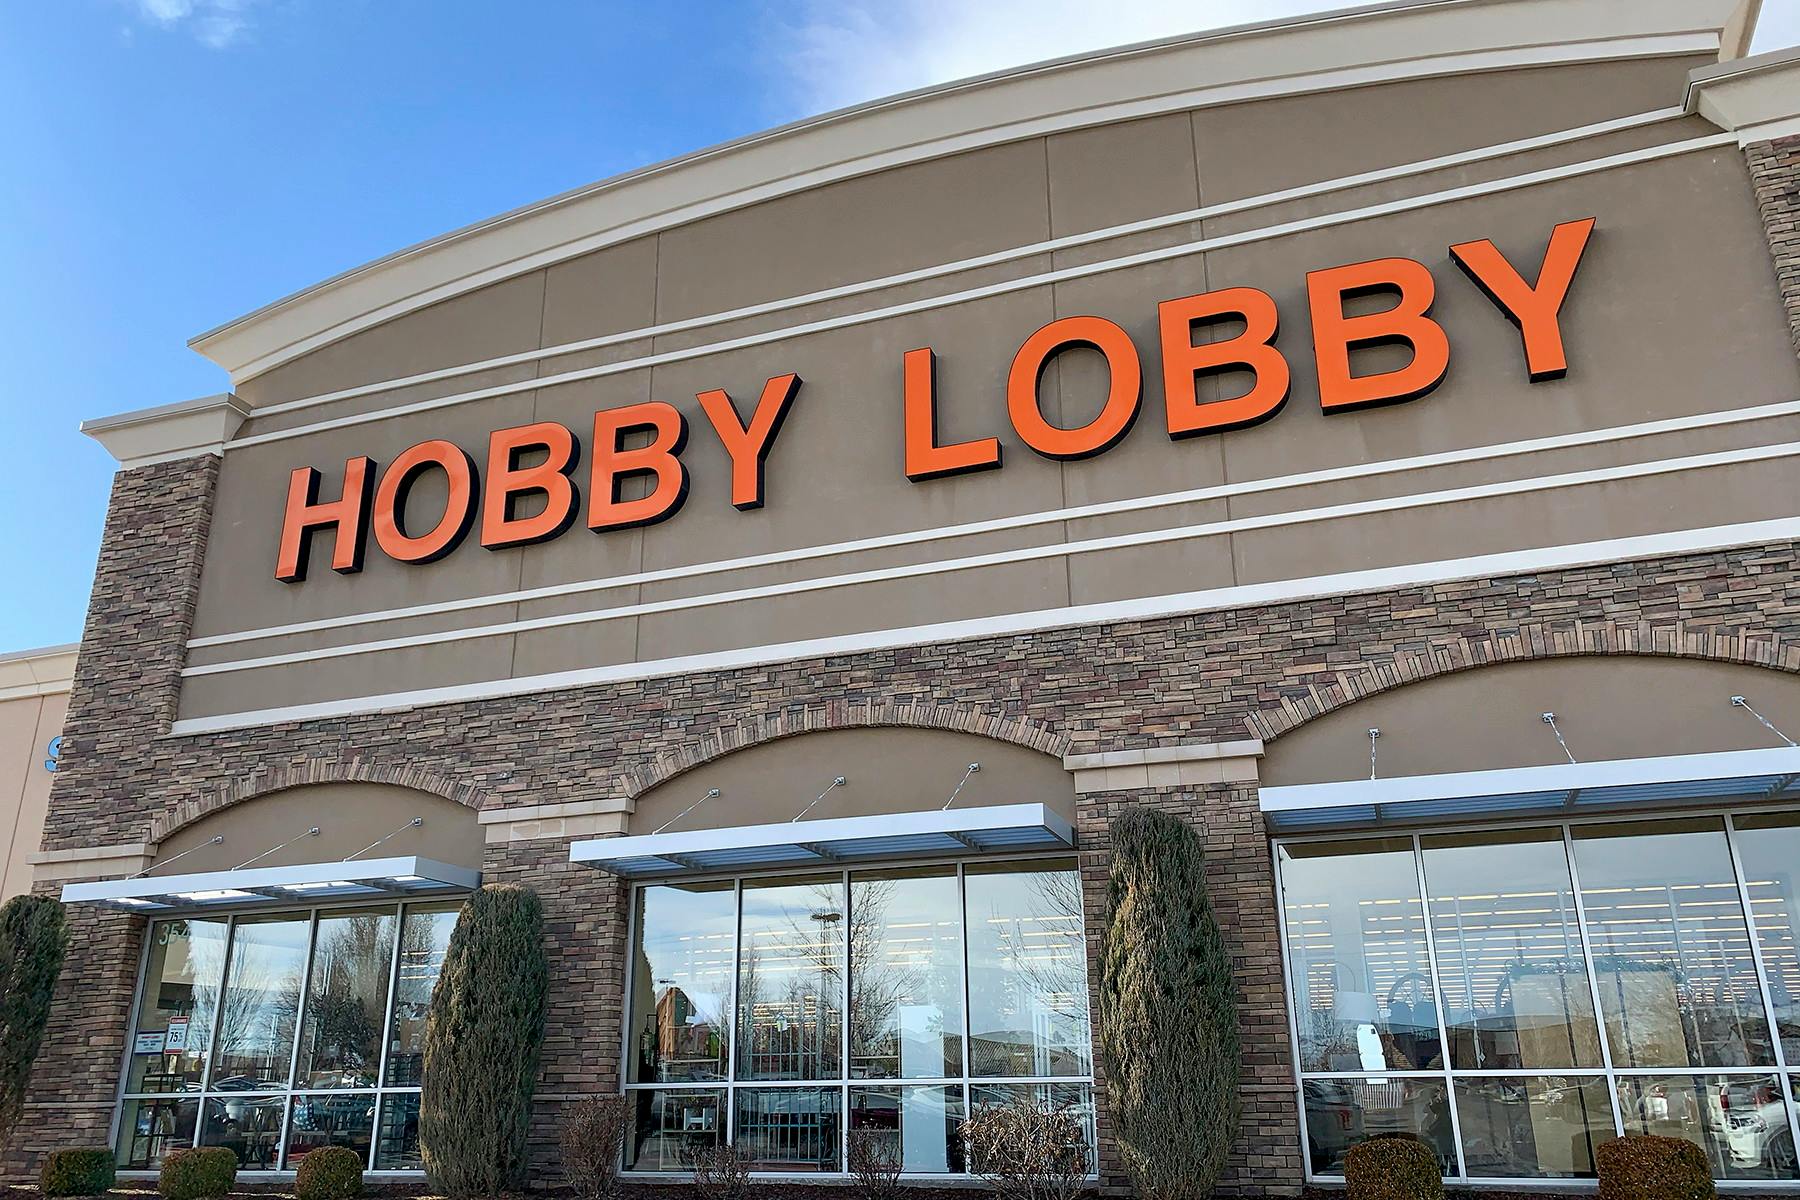 A Hobby Lobby store front.